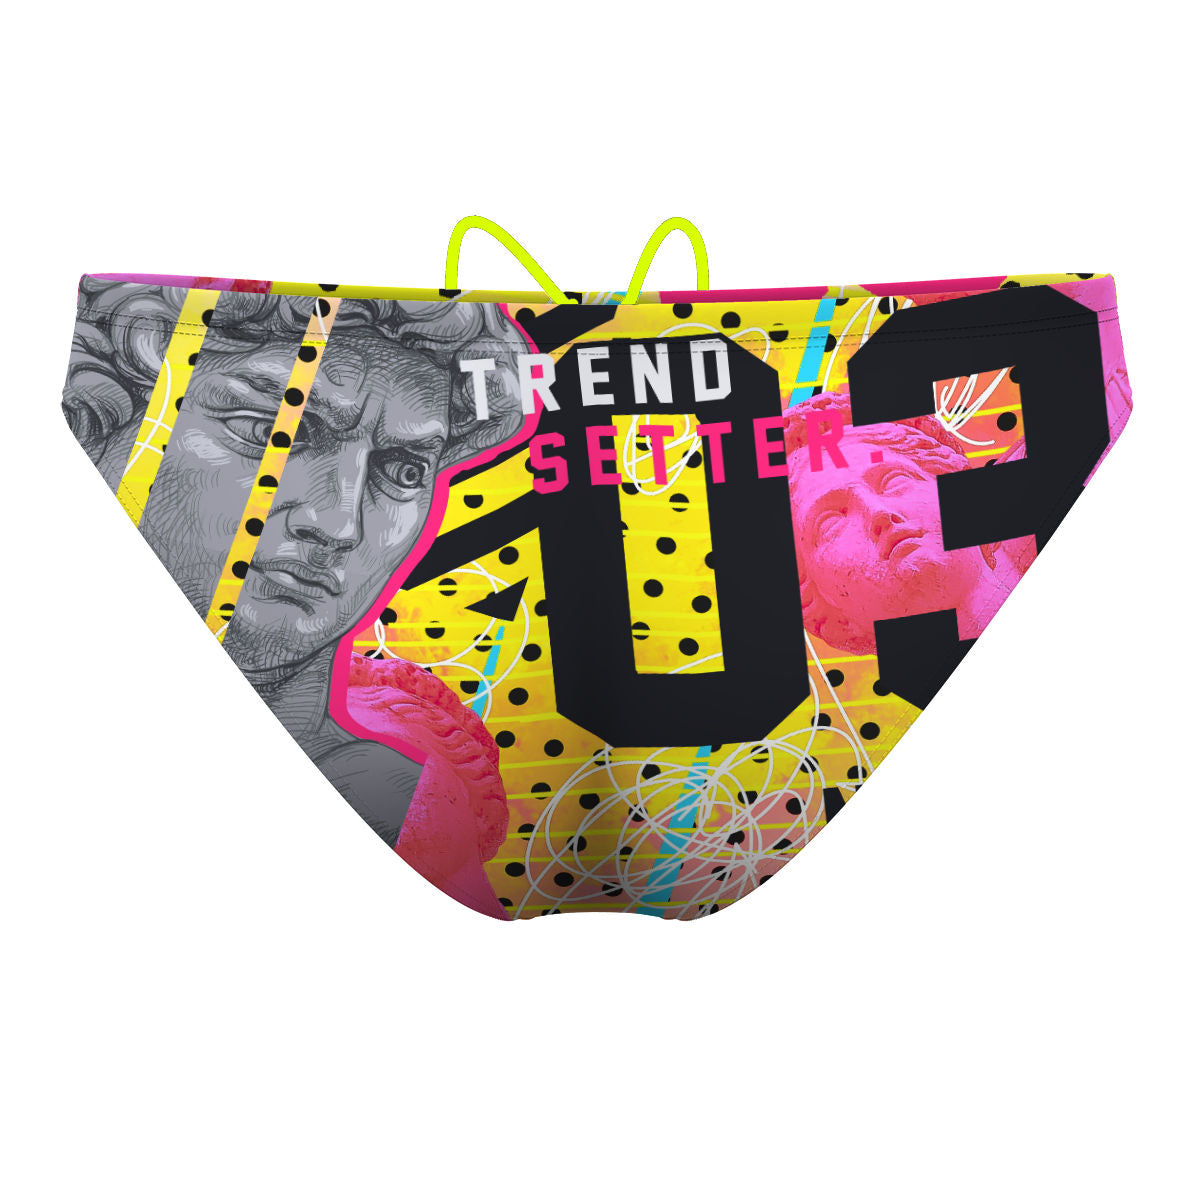 Trend Setter - Waterpolo Brief Swimsuit